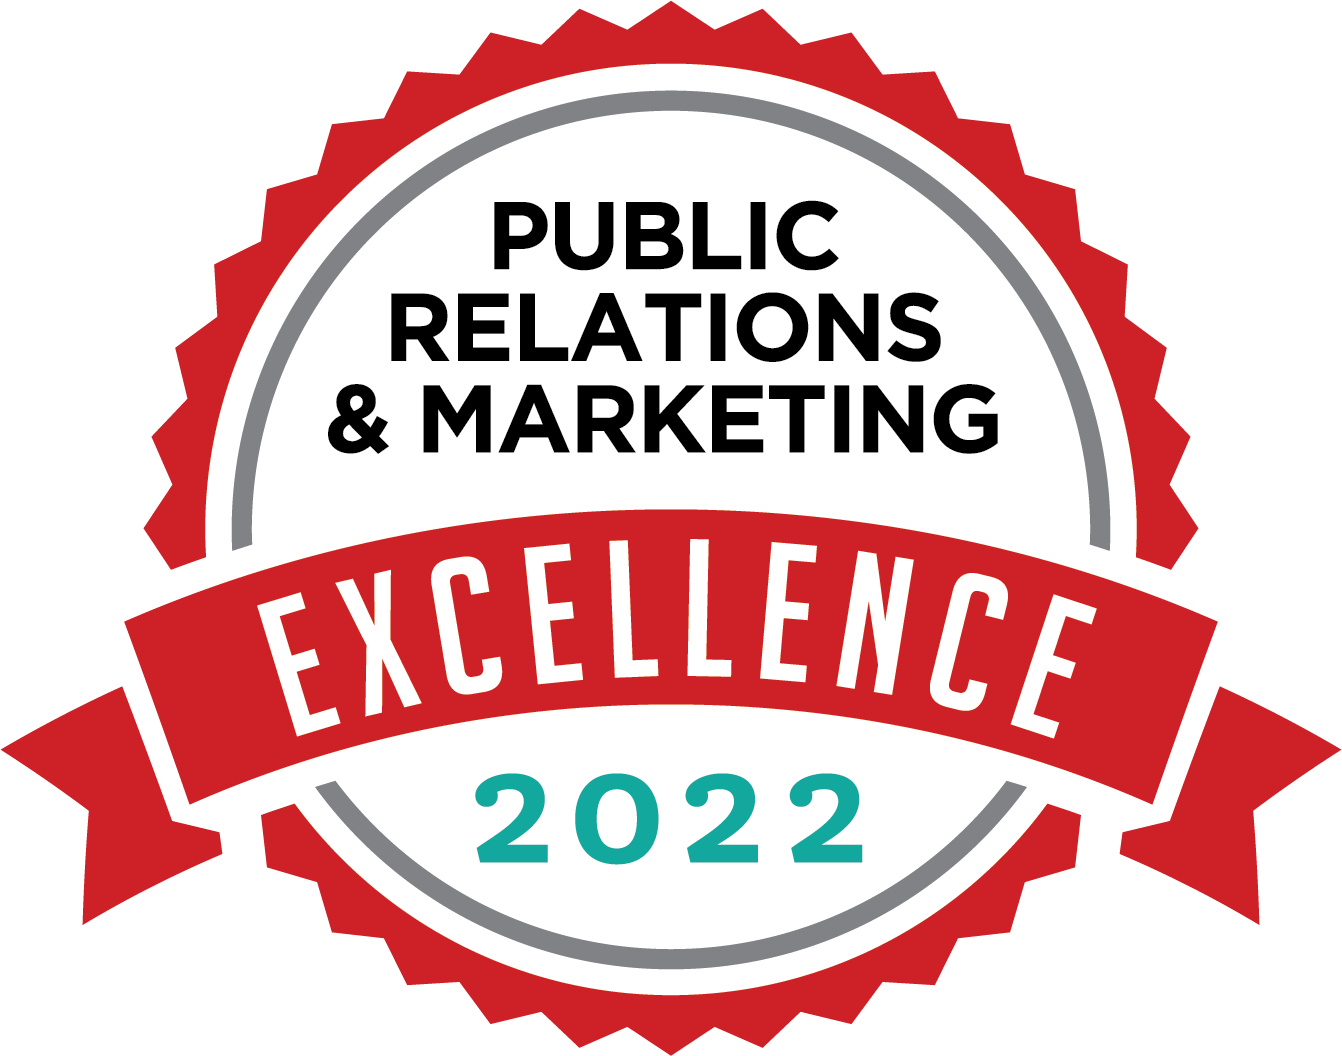 Business Intelligence Group - Marketing Department of the Year - Public Relations & Marketing Excellence 2022